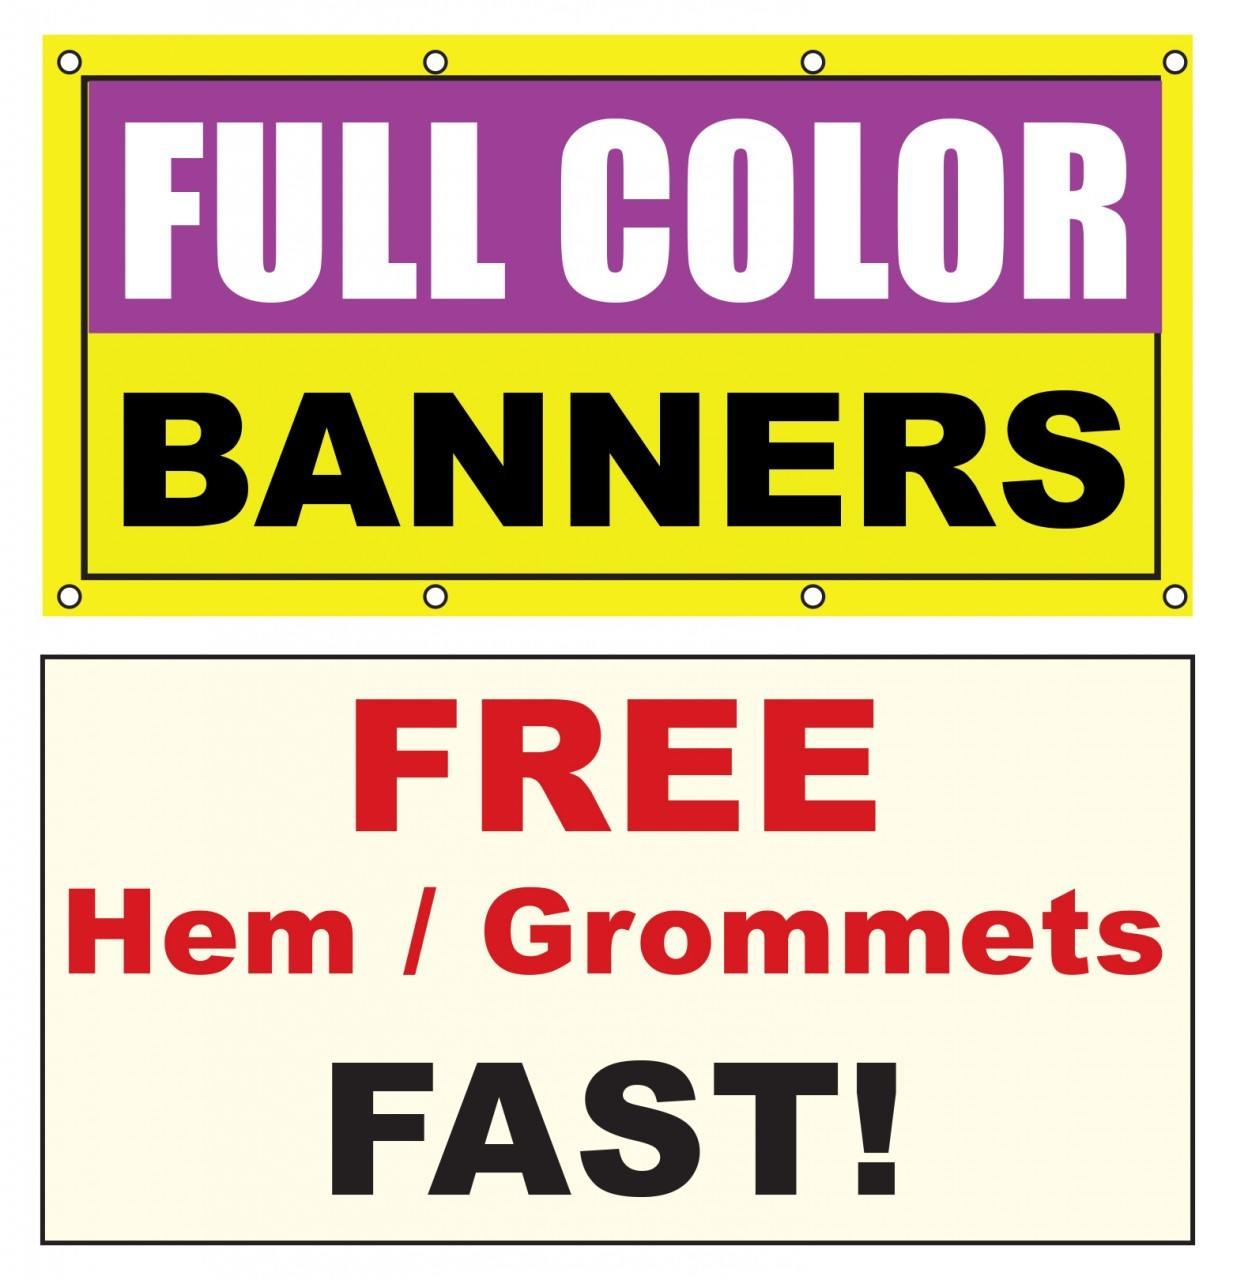 5'x17' Custom Banners Personalized Vinyl Photo Banner Printing wth 